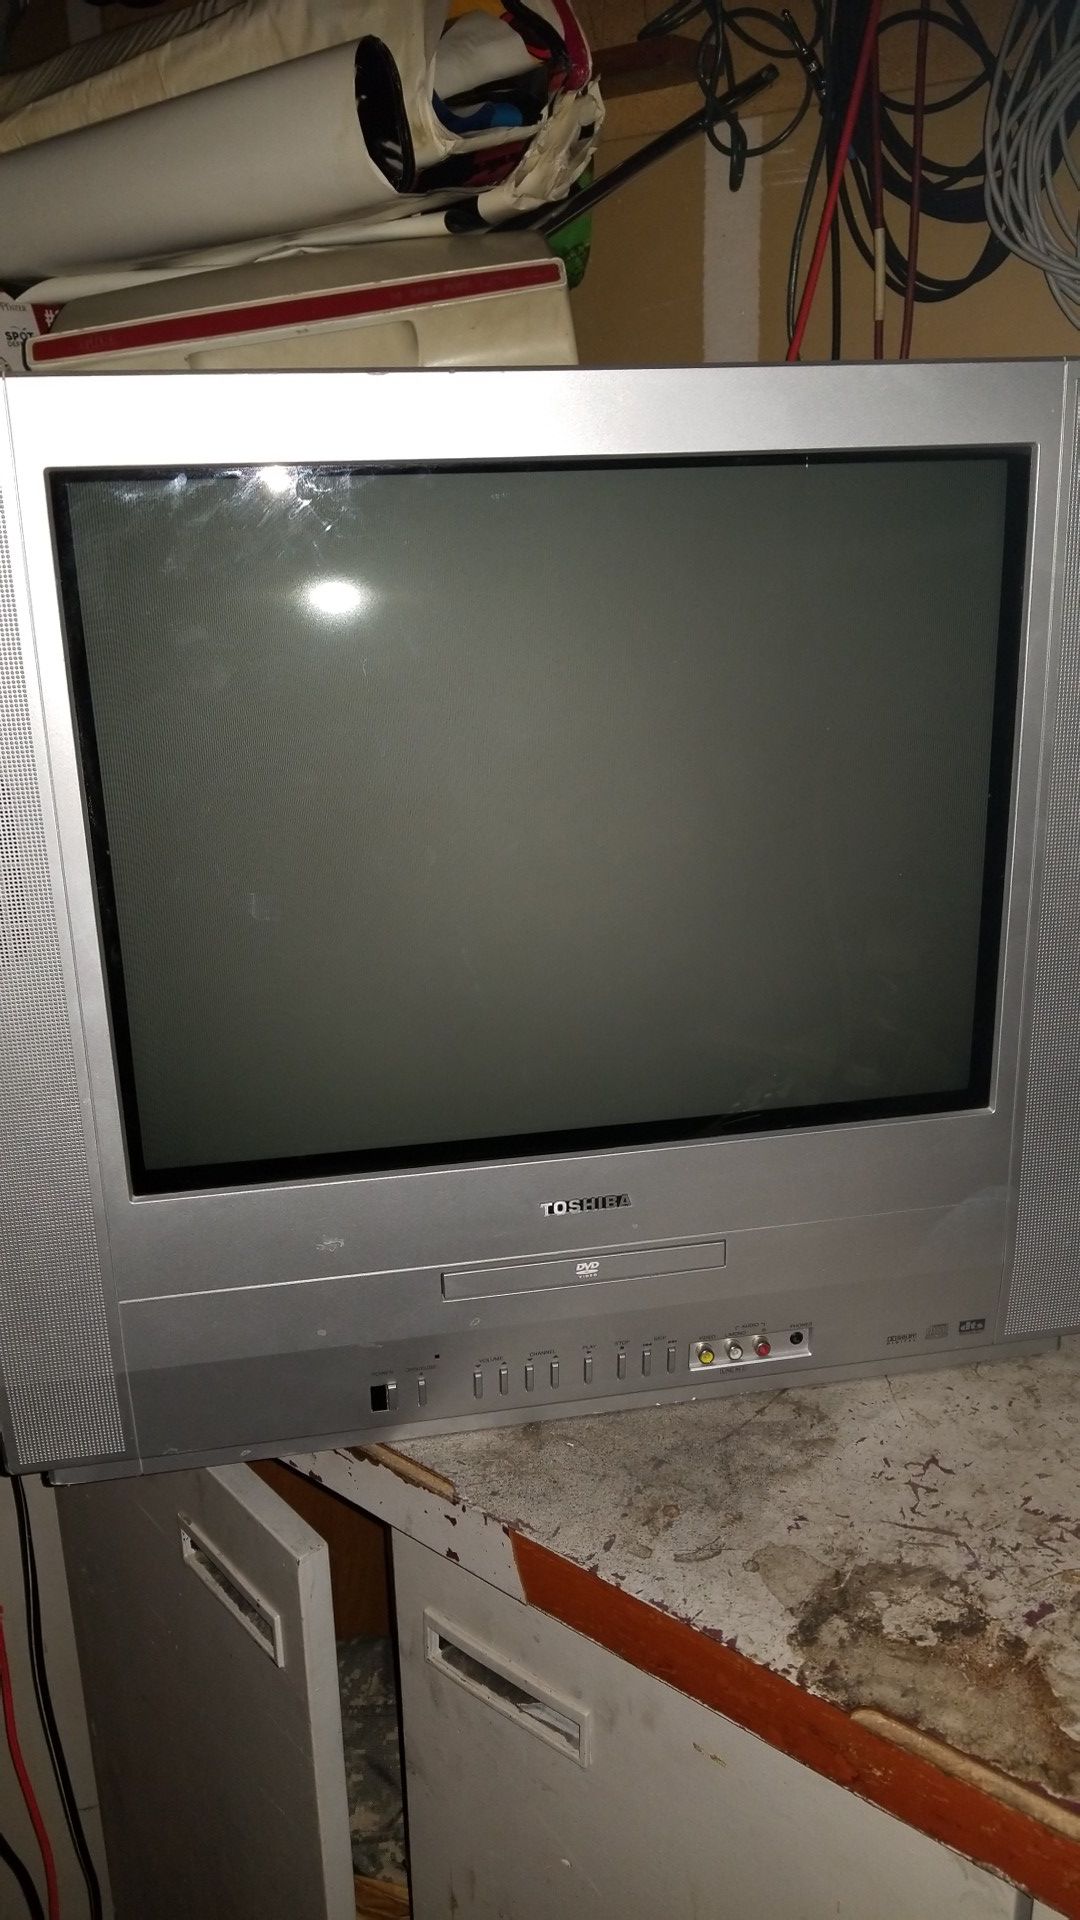 Toshiba flat screen TV with built-in DVD player